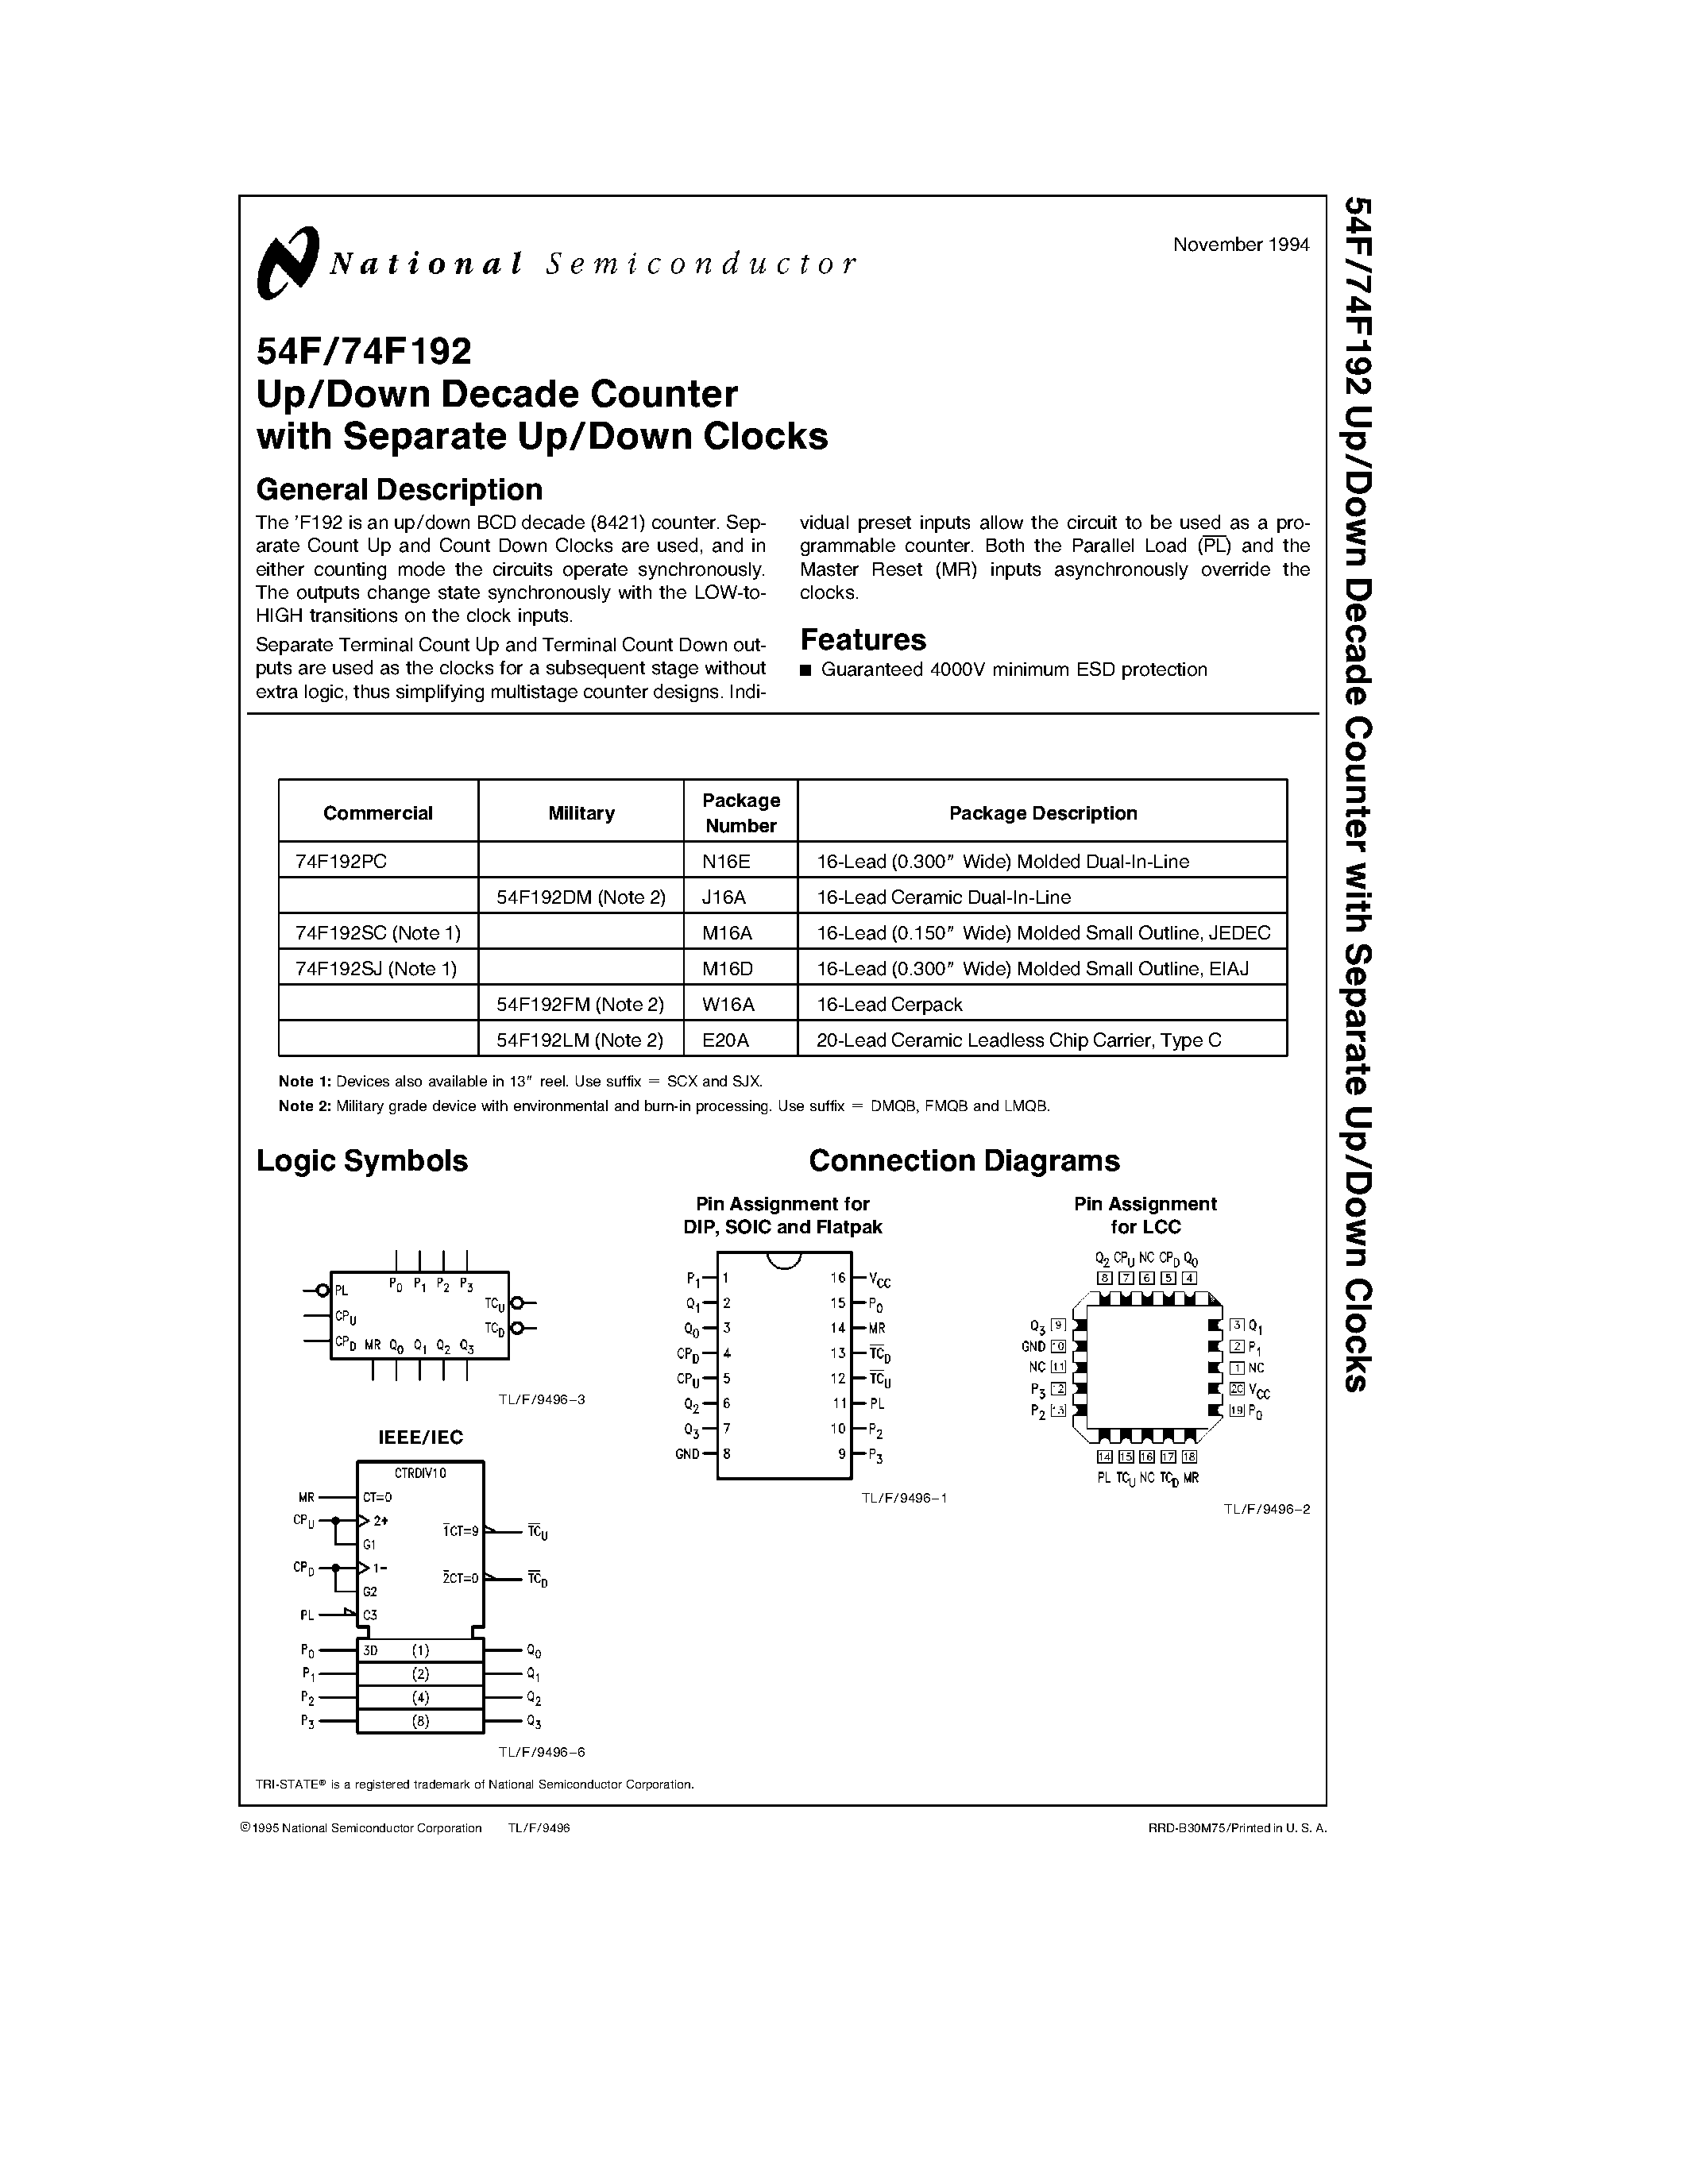 Datasheet 74F192PC - Up/Down Decade Counter with Separate Up/Down Clocks page 1